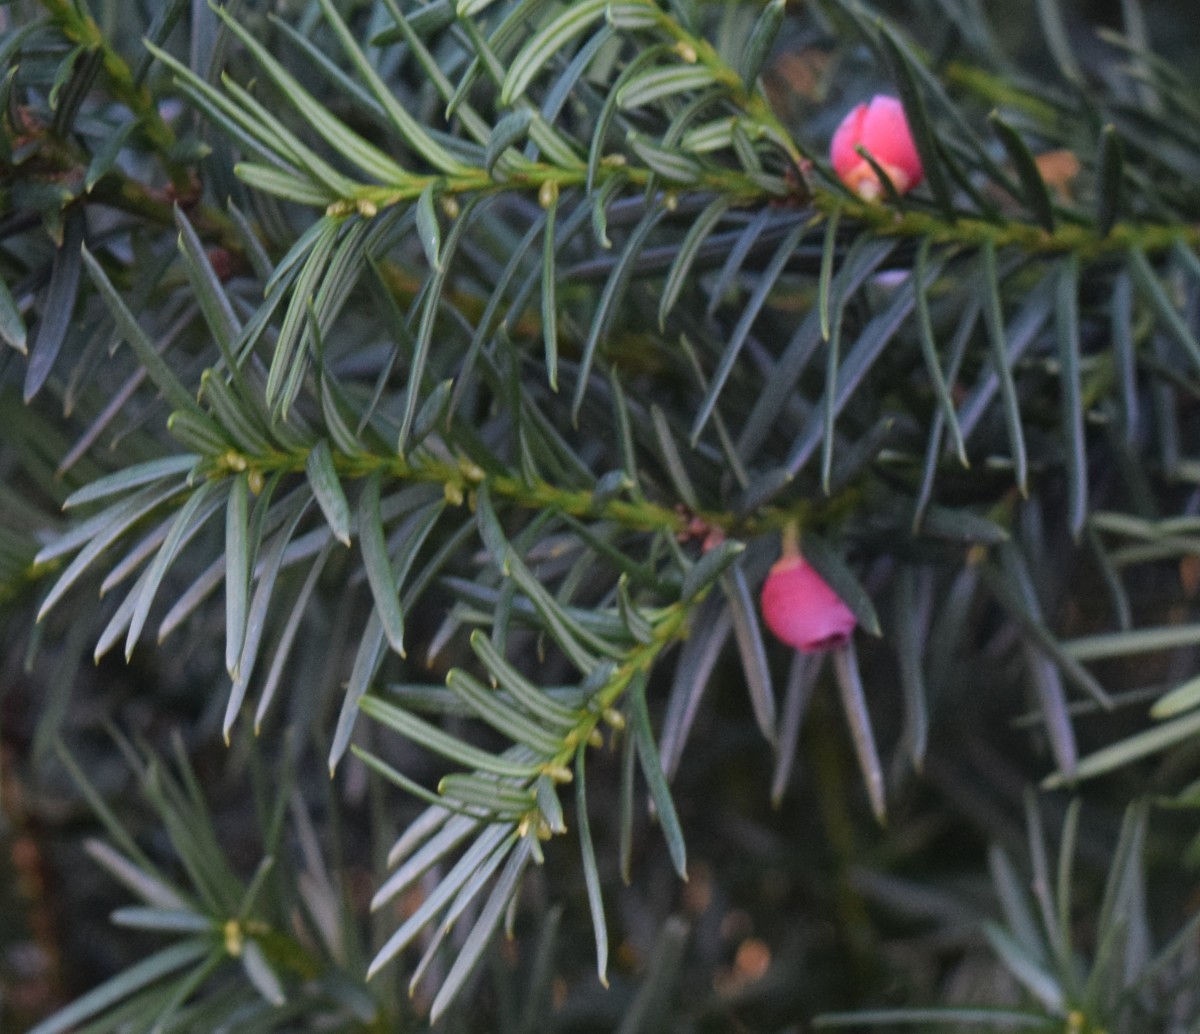 Needle-like foliage of Conifer taxus with berries